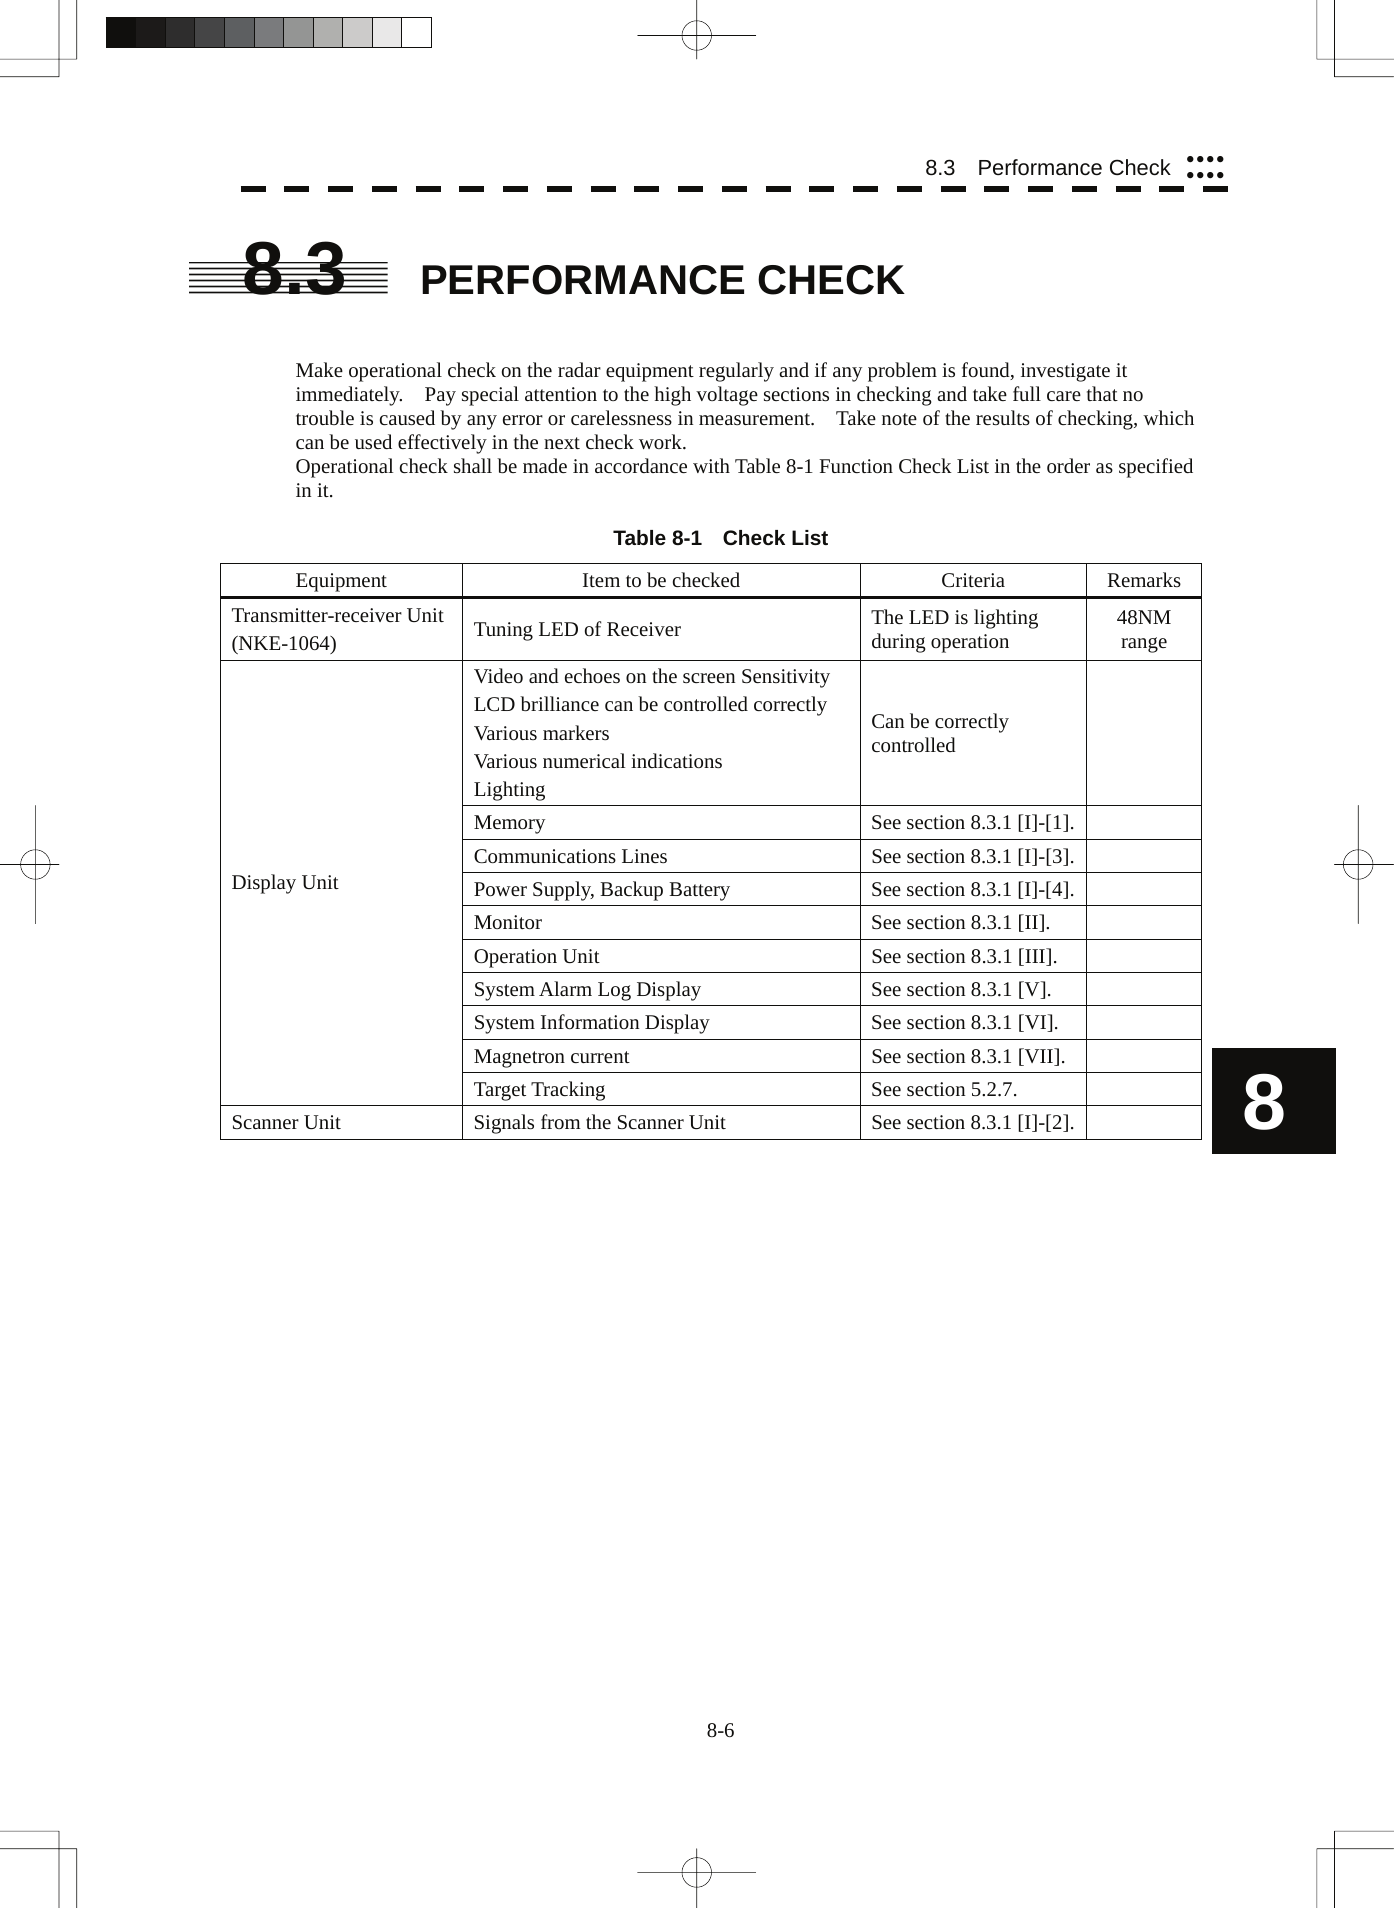  8-6 8.3  Performance Check yyyyyyyy8 8.3 PERFORMANCE CHECK   Make operational check on the radar equipment regularly and if any problem is found, investigate it immediately.    Pay special attention to the high voltage sections in checking and take full care that no trouble is caused by any error or carelessness in measurement.    Take note of the results of checking, which can be used effectively in the next check work. Operational check shall be made in accordance with Table 8-1 Function Check List in the order as specified in it.  Table 8-1  Check List    Equipment  Item to be checked  Criteria  Remarks Transmitter-receiver Unit (NKE-1064)  Tuning LED of Receiver  The LED is lighting during operation  48NM range Video and echoes on the screen Sensitivity LCD brilliance can be controlled correctly Various markers Various numerical indications   Lighting Can be correctly controlled   Memory  See section 8.3.1 [I]-[1].  Communications Lines  See section 8.3.1 [I]-[3].  Power Supply, Backup Battery  See section 8.3.1 [I]-[4].  Monitor  See section 8.3.1 [II].   Operation Unit  See section 8.3.1 [III].   System Alarm Log Display  See section 8.3.1 [V].   System Information Display  See section 8.3.1 [VI].   Magnetron current  See section 8.3.1 [VII].   Display Unit Target Tracking  See section 5.2.7.   Scanner Unit  Signals from the Scanner Unit  See section 8.3.1 [I]-[2].  